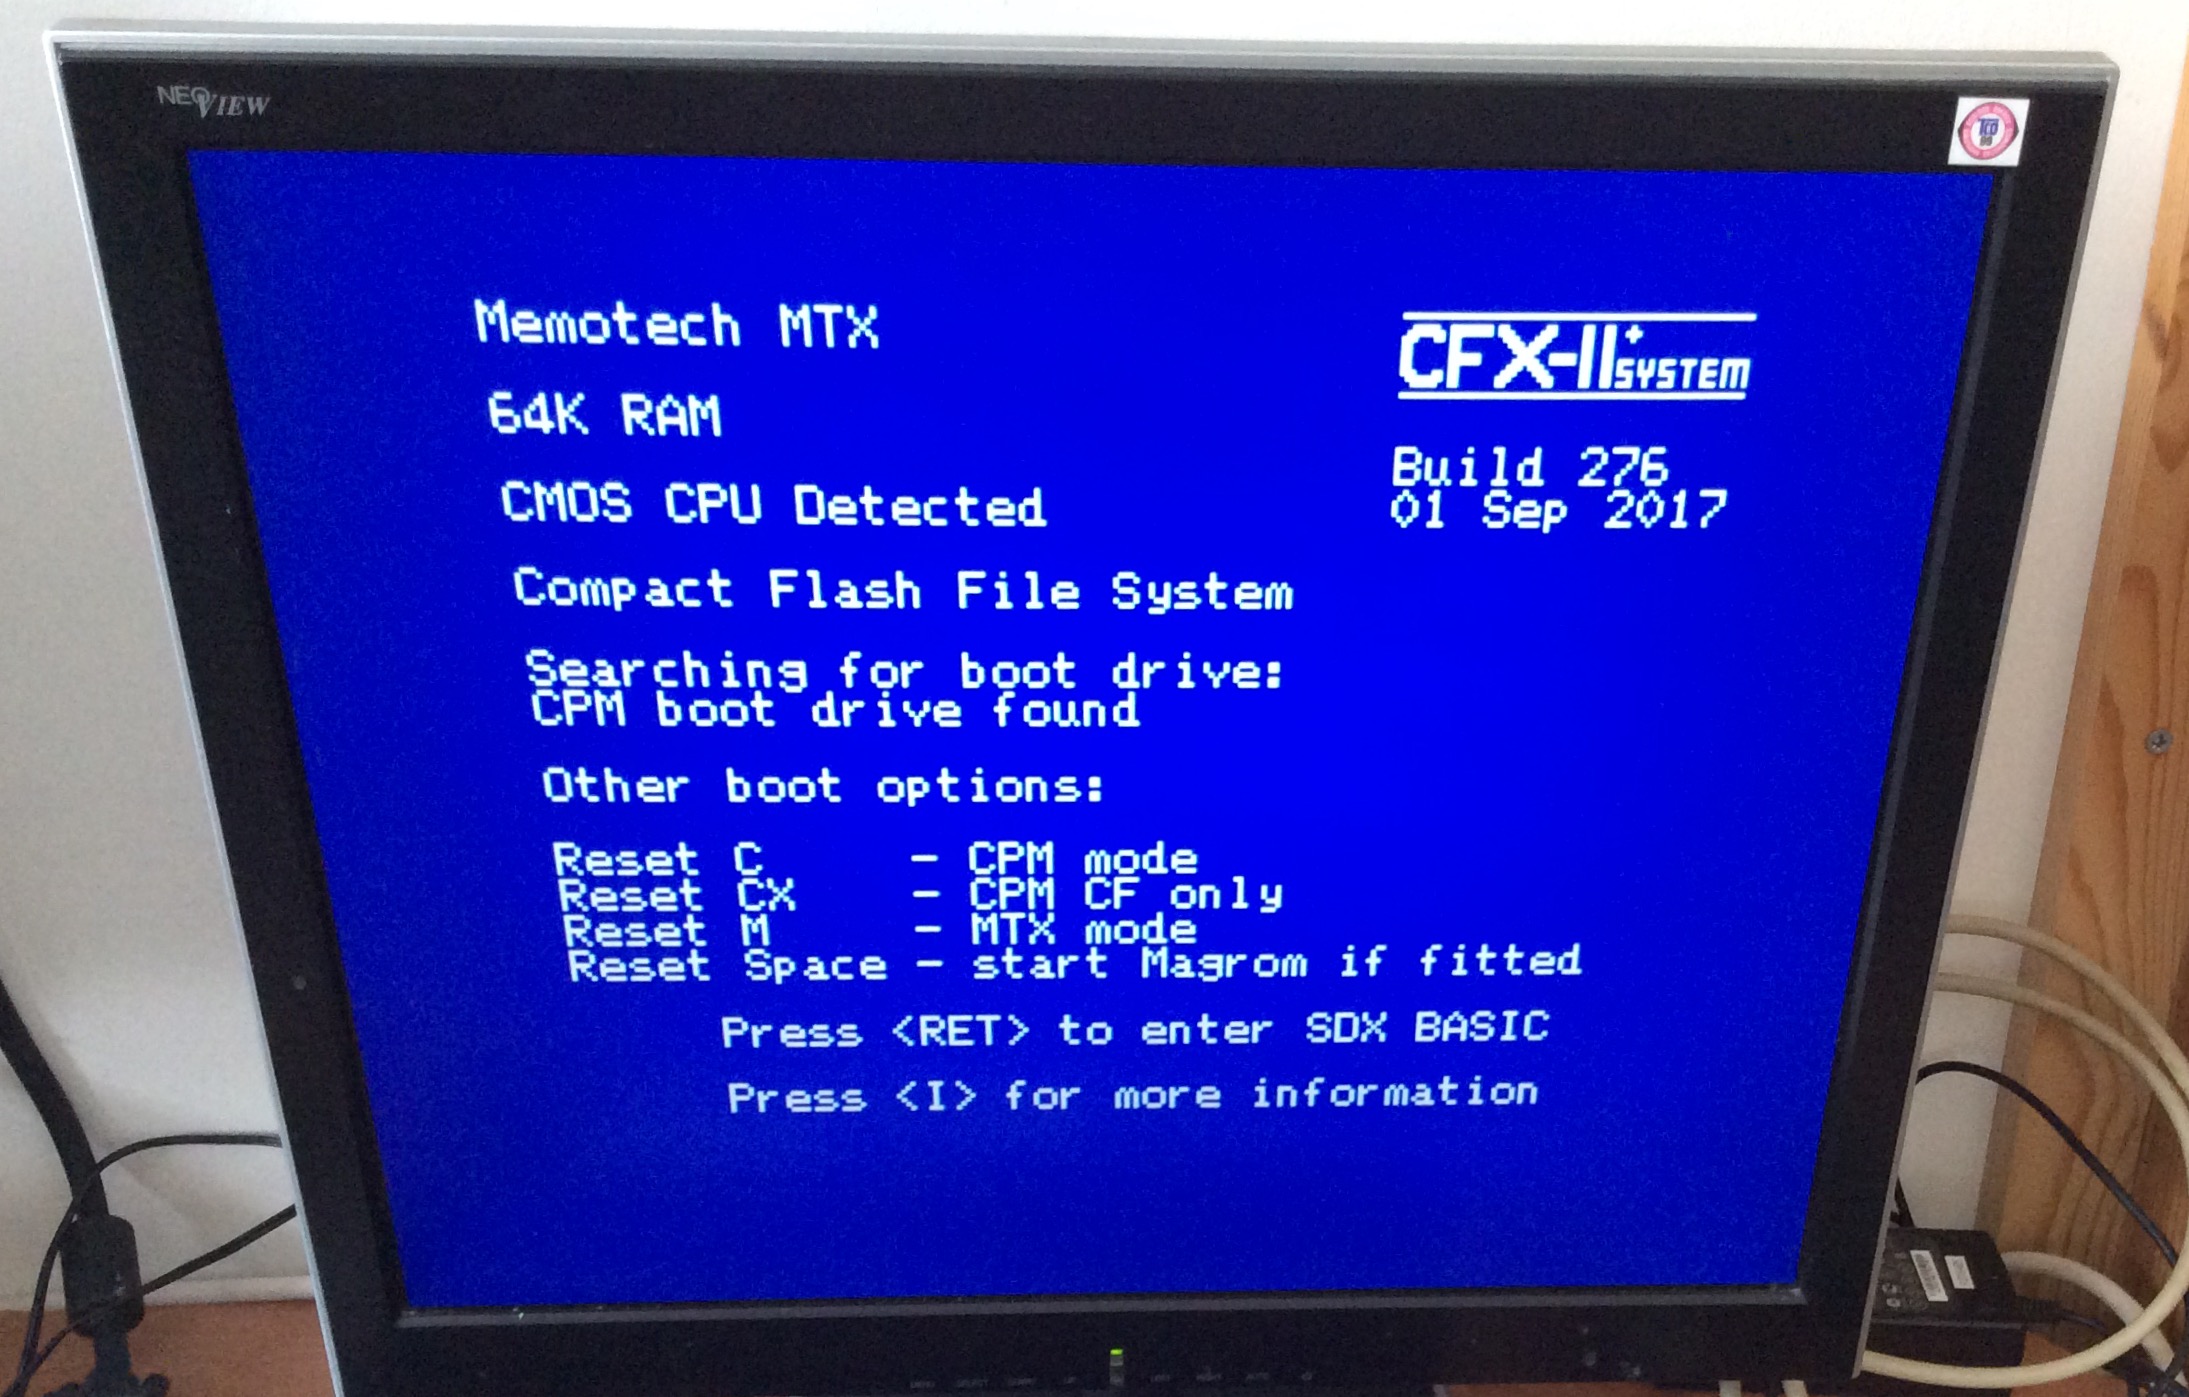 The screen output of the CFX II+